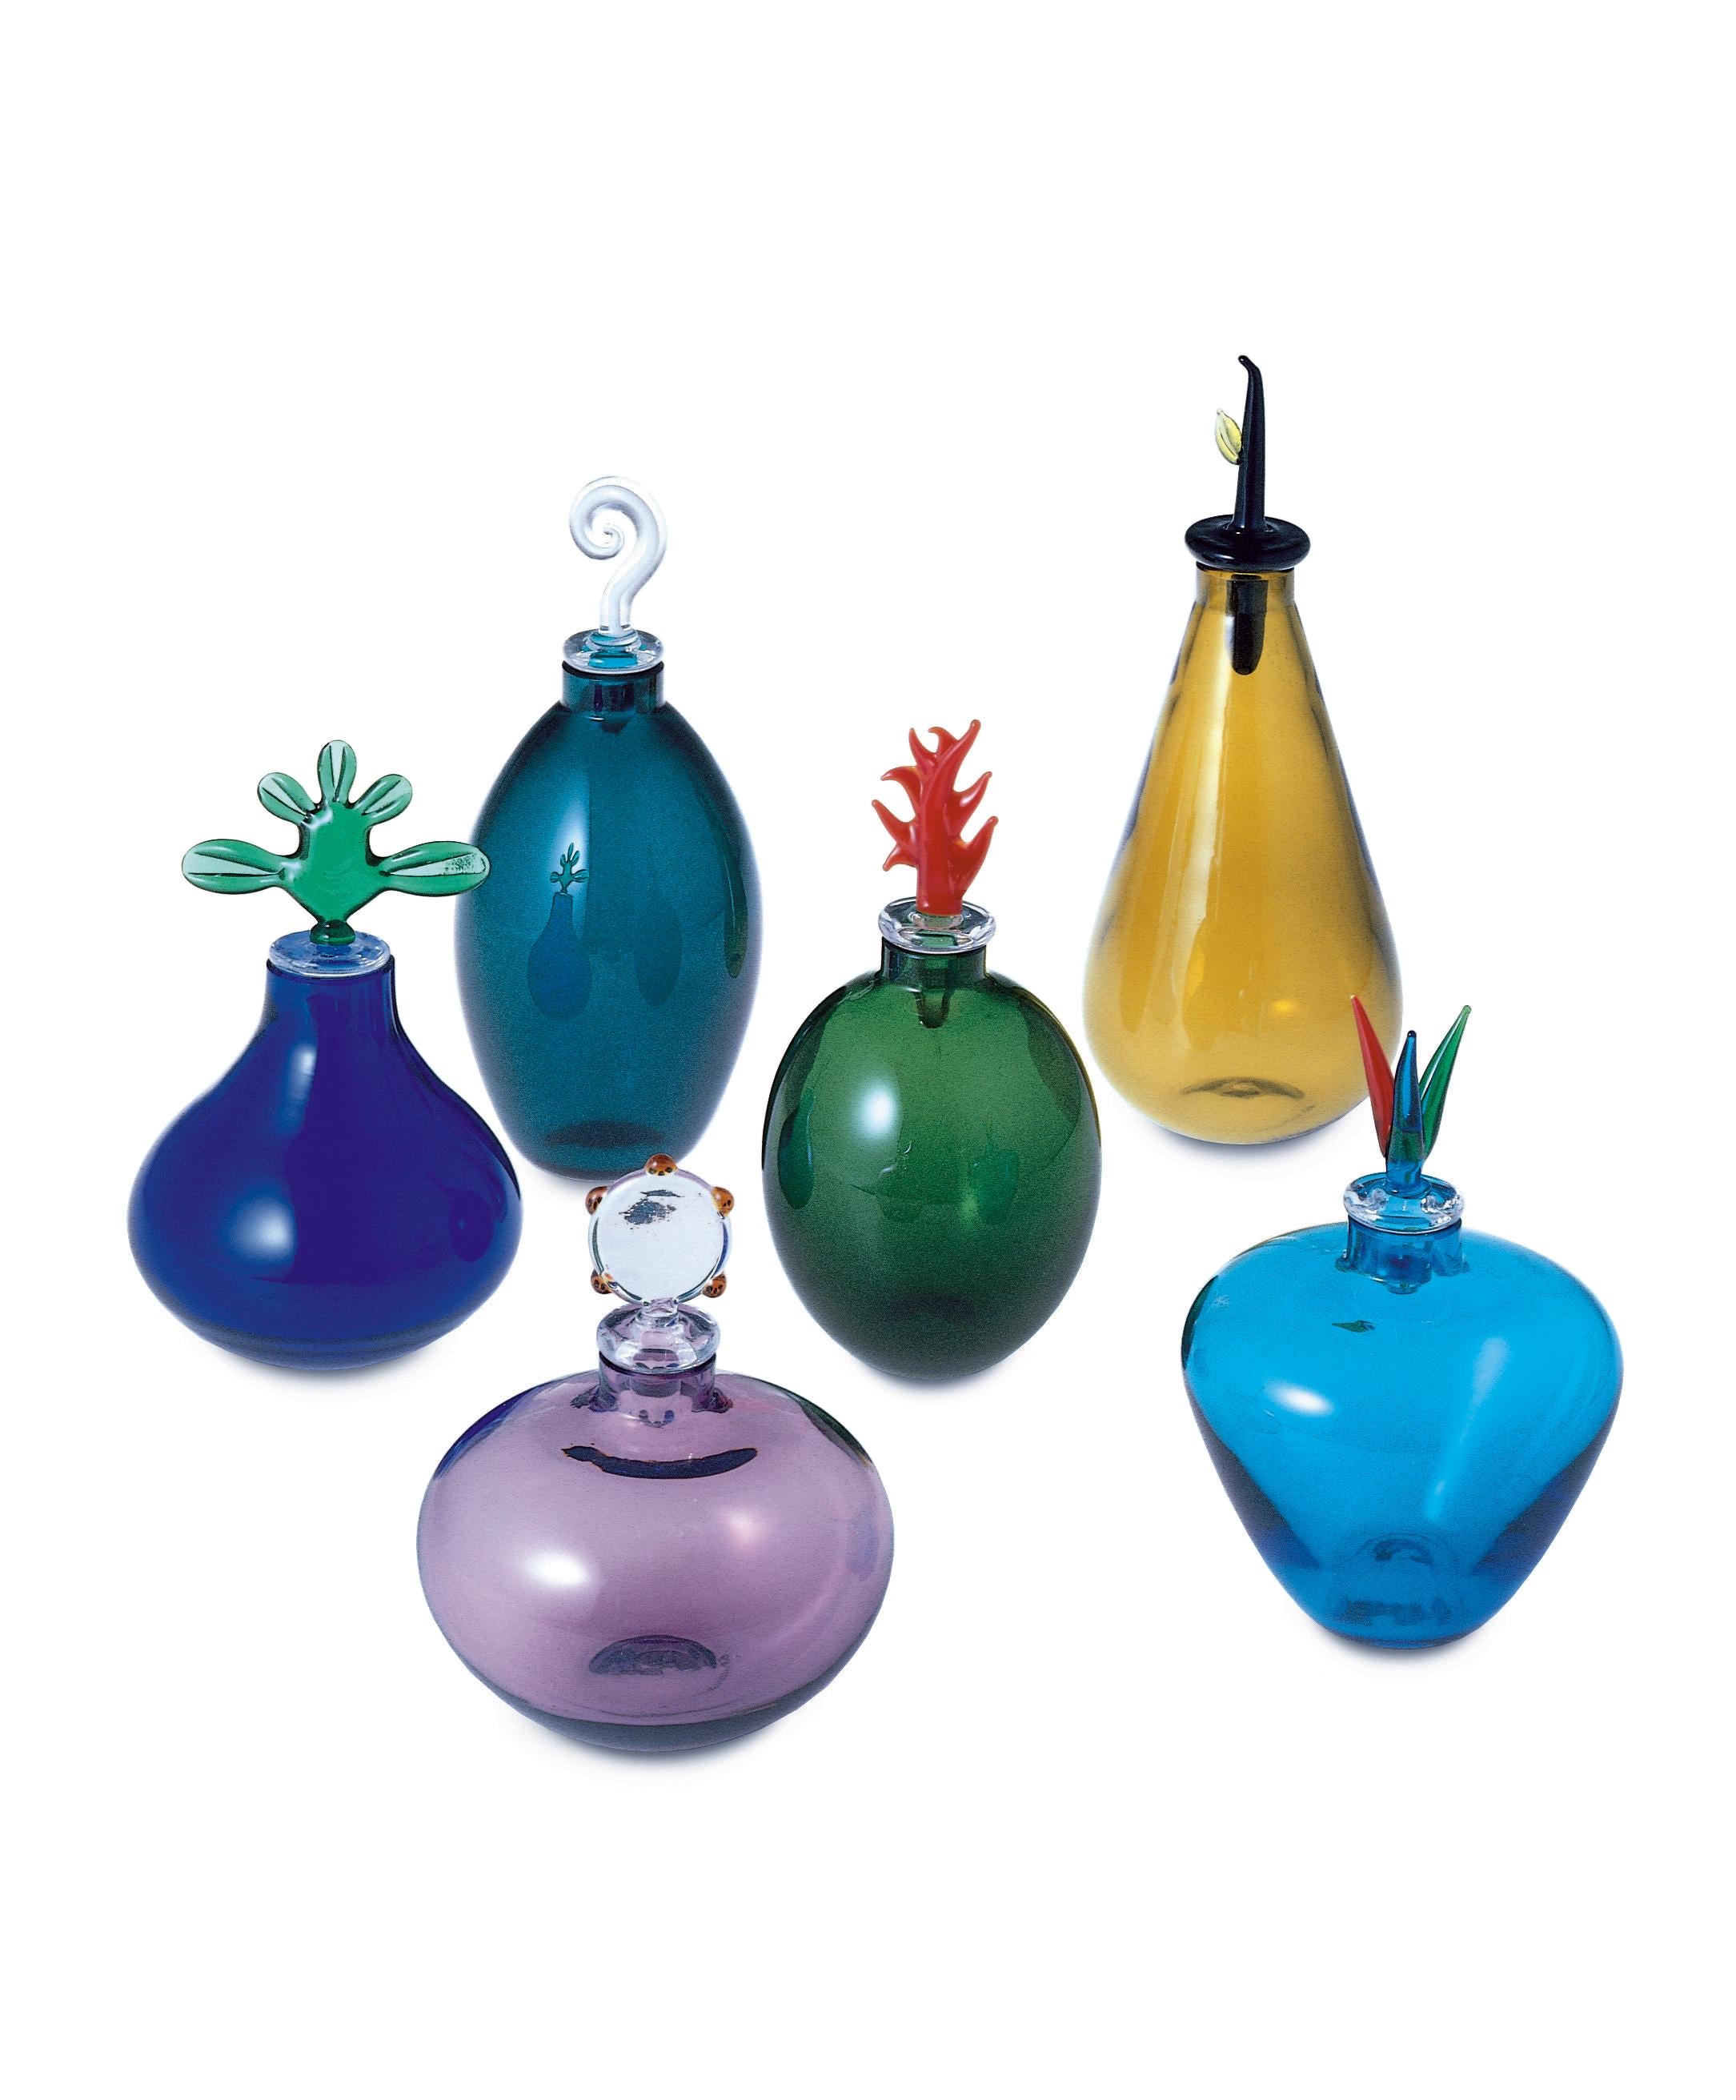 Venini Monofiori glass vase in sapphire by Laura de Santillana. “Monofiori” blown handmade glass with stoppers in various forms and colors. Item labelled as “02”, as shown in the image, available for this price.

Color: Sapphire 
Dimensions: Ø